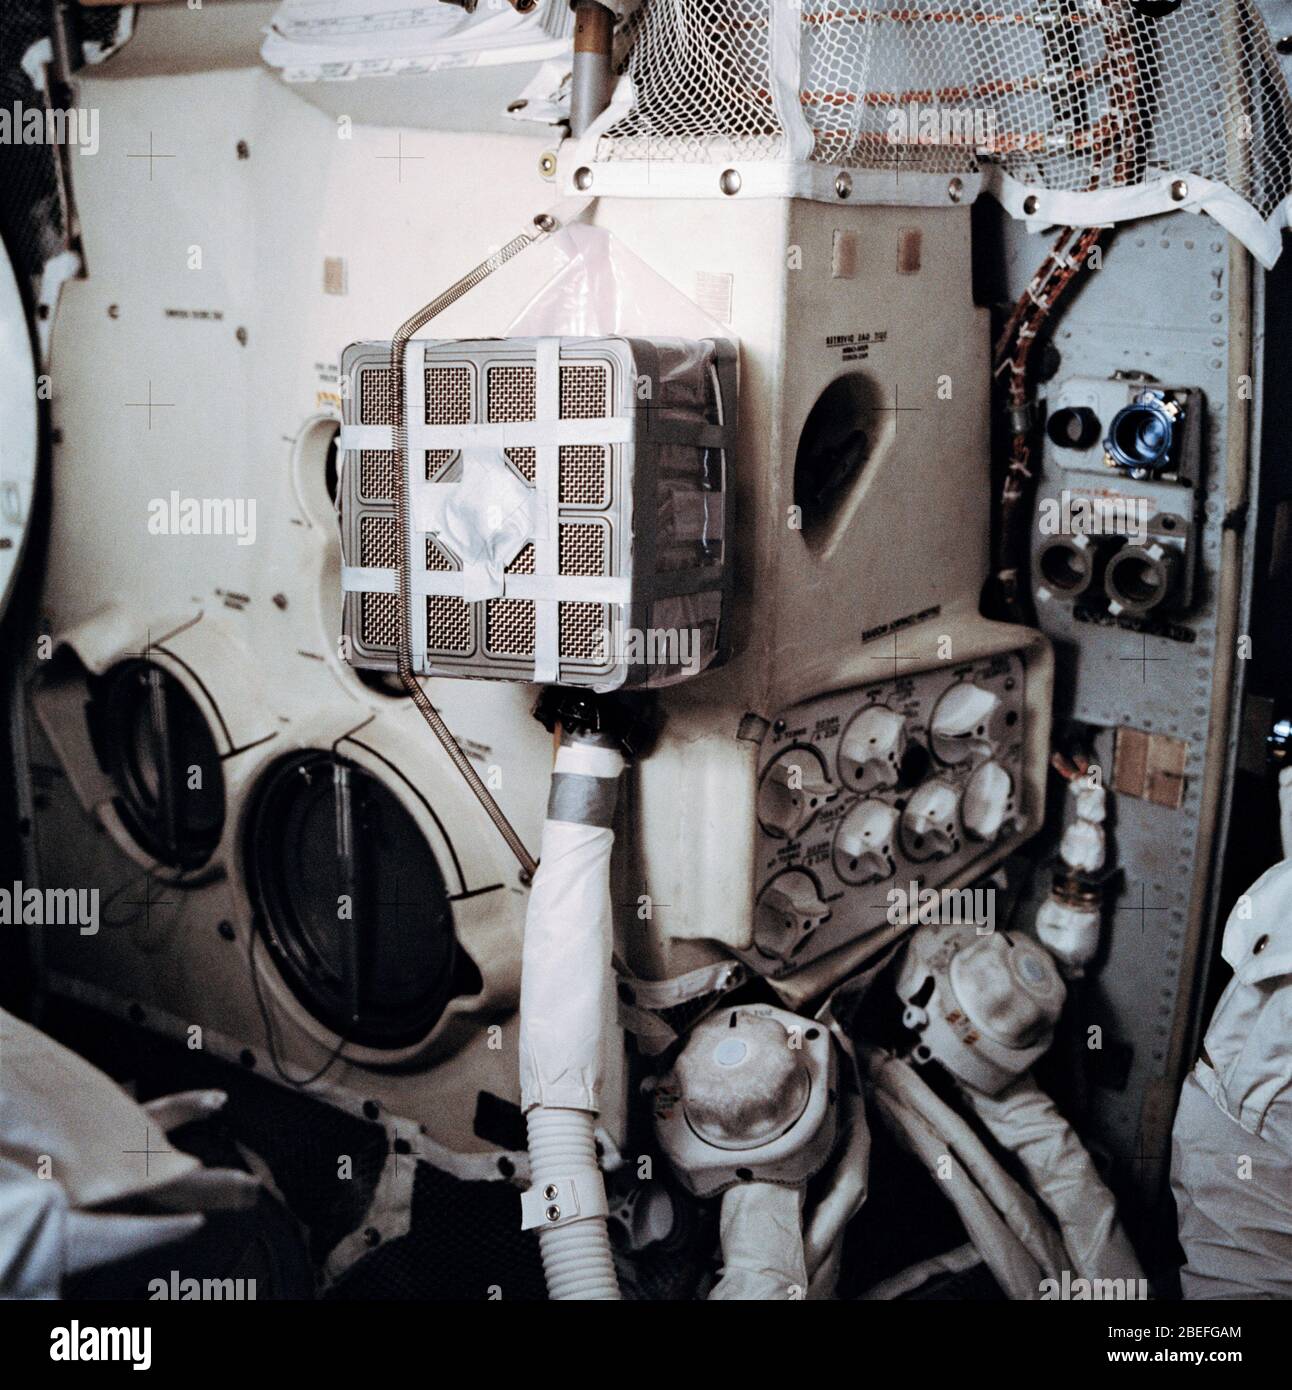 An interior view of the Apollo 13 Lunar Module (LM) showing the 'mailbox,' a jury-rigged arrangement the astronauts built to use the Command Module (CM) lithium hydroxide canisters to purge carbon dioxide from the LM. Lithium hydroxide is used to scrub CO2 from the spacecraft's atmosphere. Apollo 13, launched on April 11, 1970, was NASA's third crewed mission to the moon. Two days later, on April 13, while en route to the lunar surface, a fault in the electrical system of one of the Service Module's oxygen tanks produced an explosion that caused both oxygen tanks to fail and also led to a loss Stock Photo